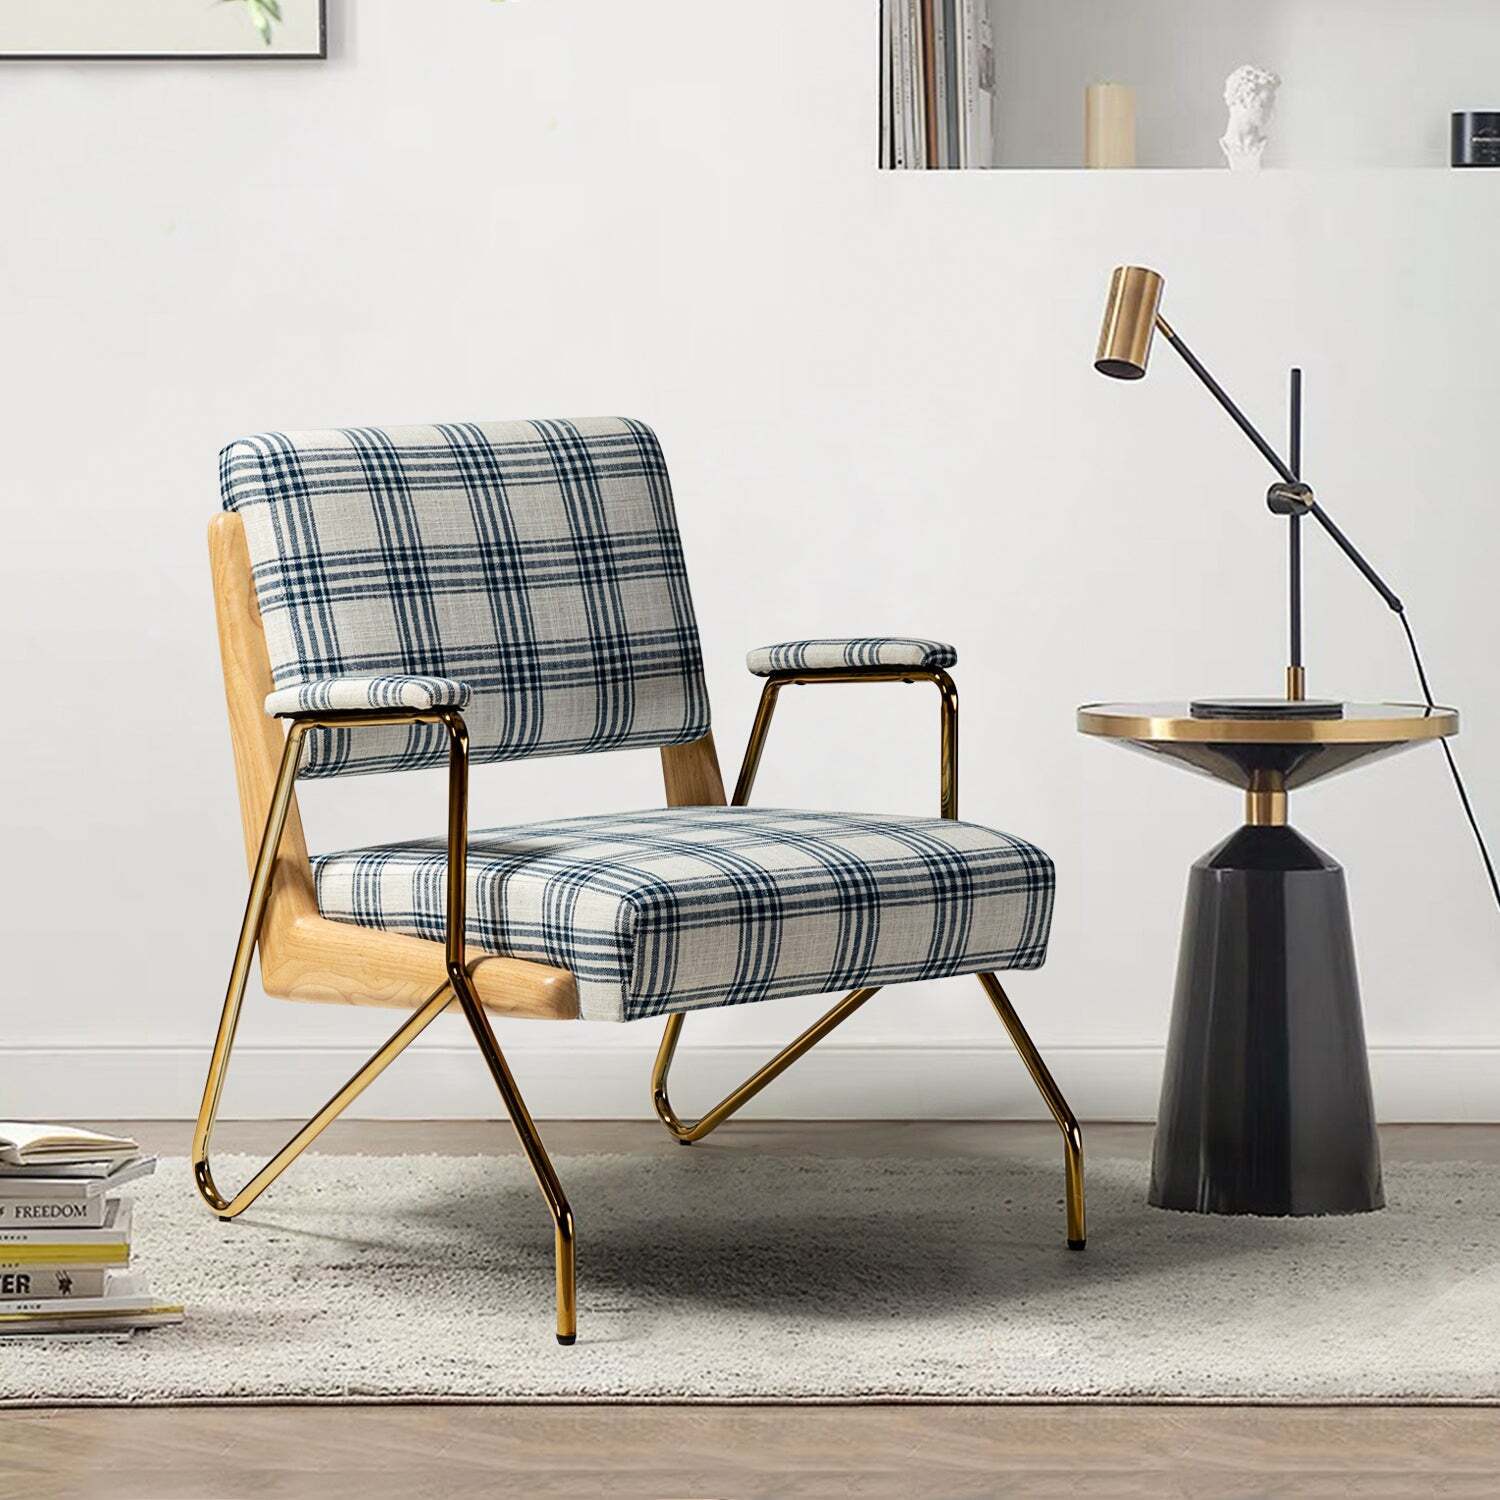 New Age Modern Contemporary Plaid Chairs